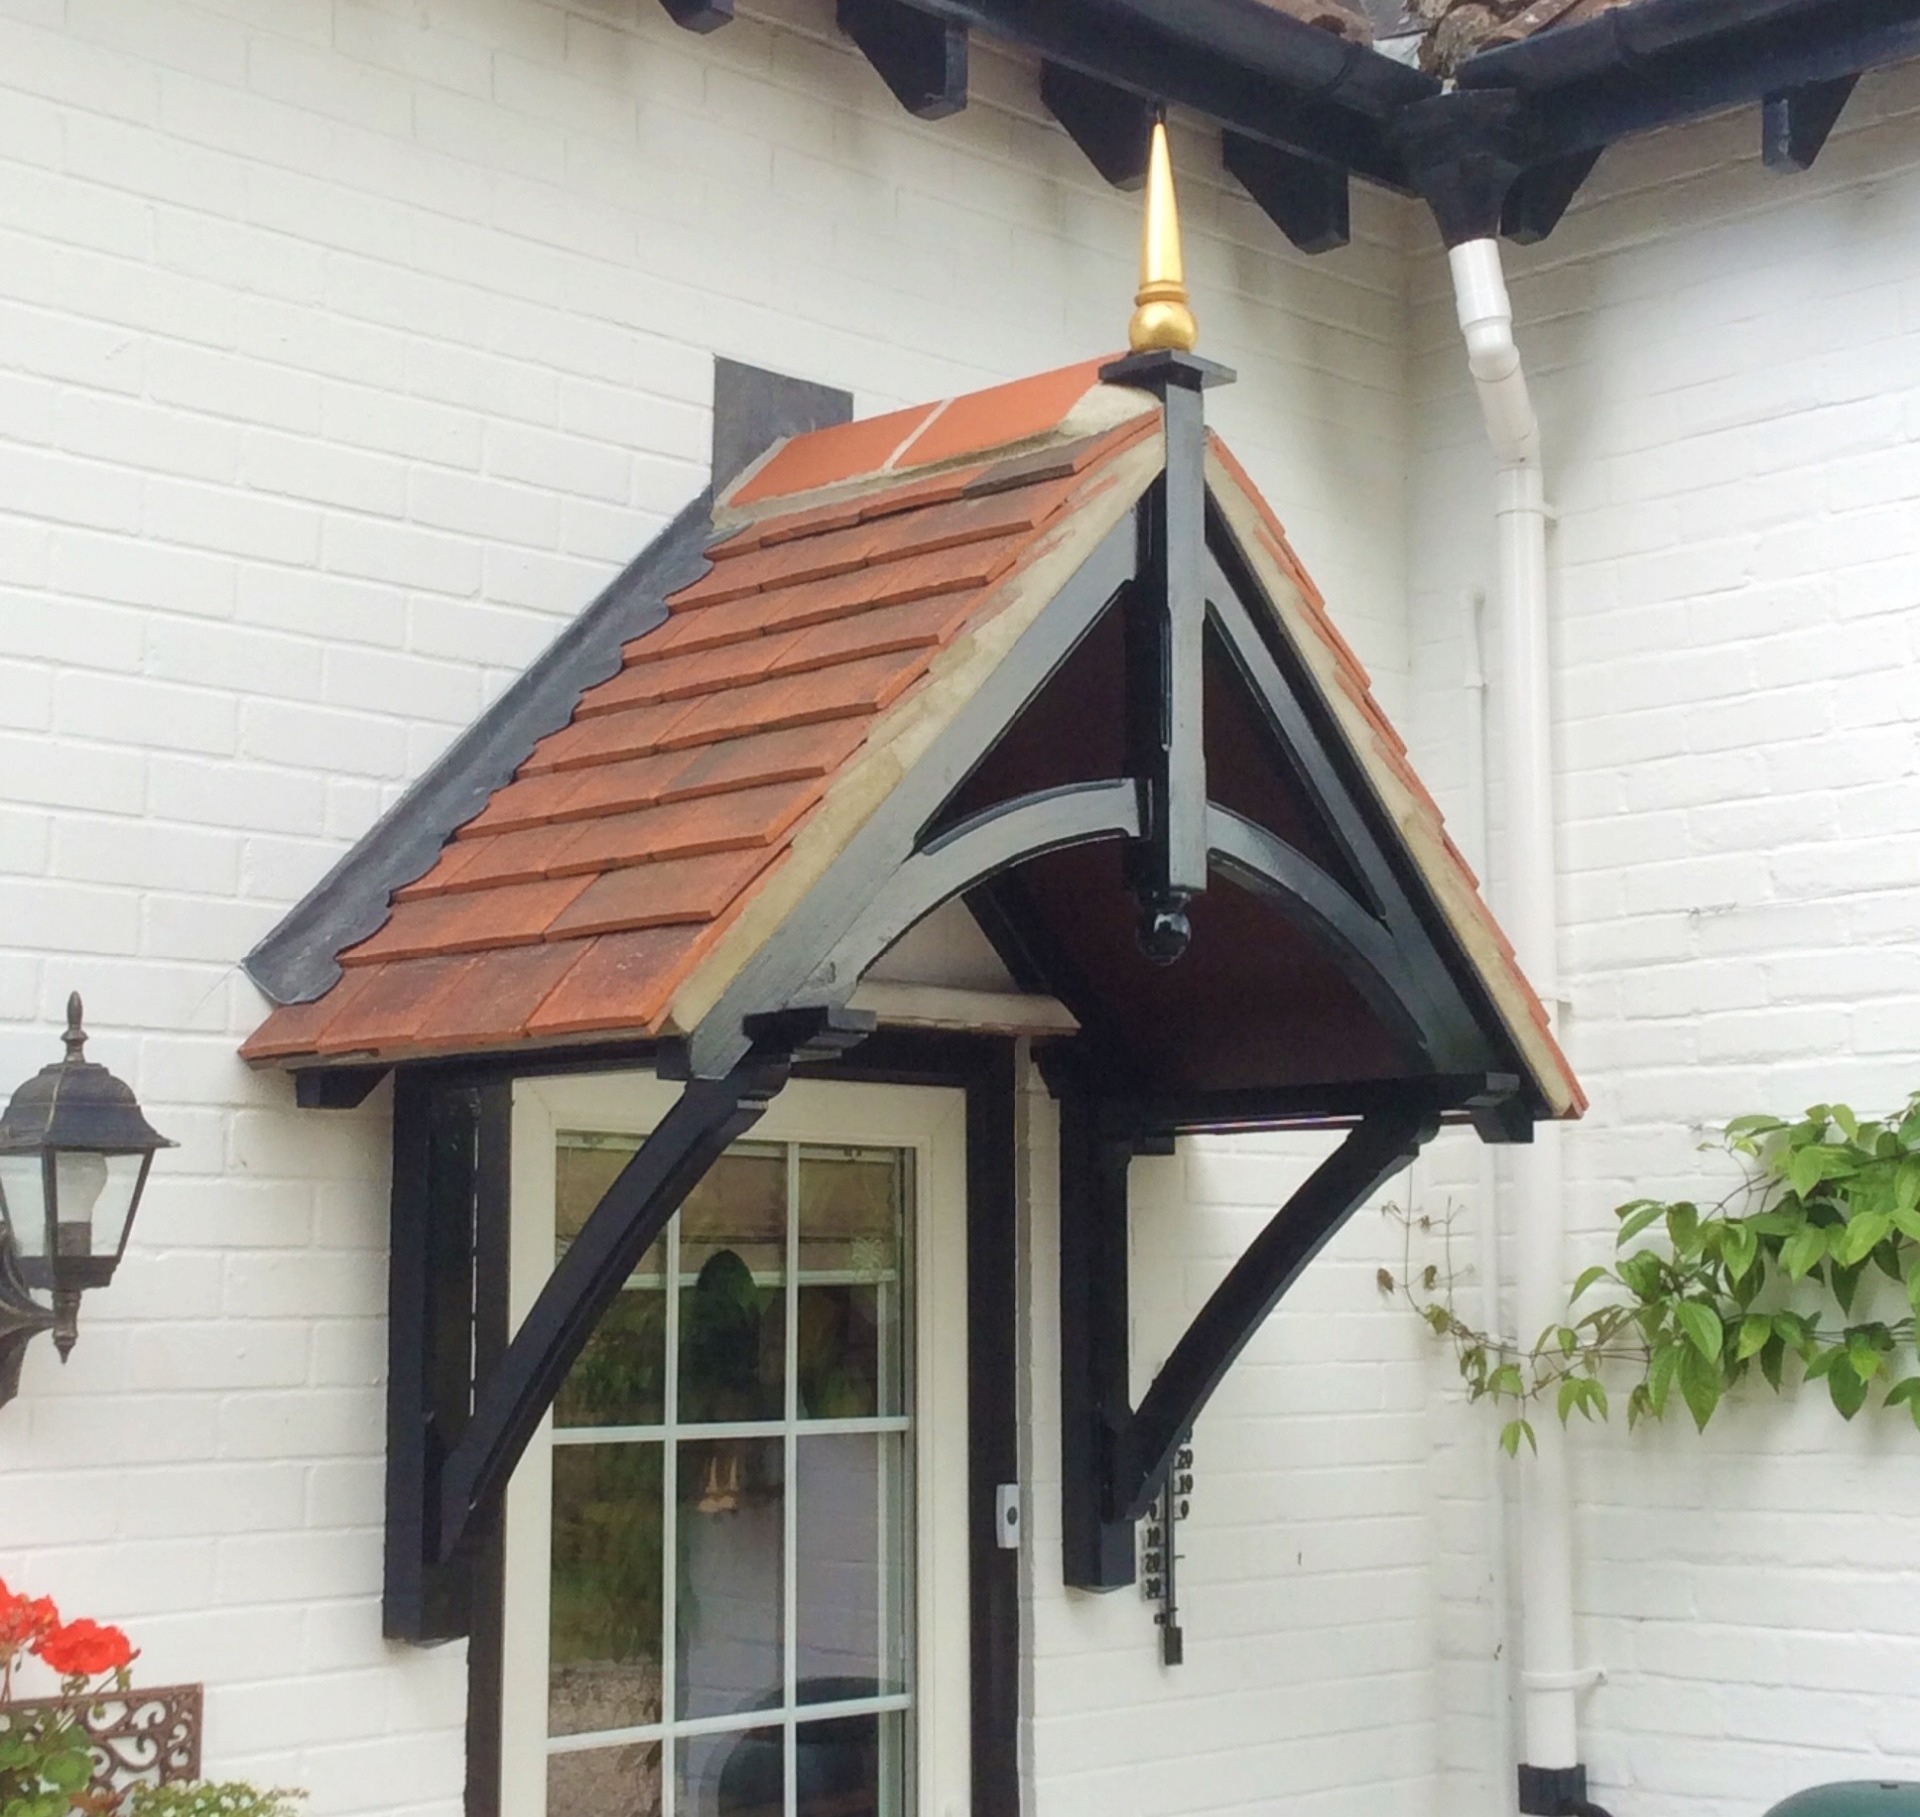 One of our A frame canopies, the Chilcombe